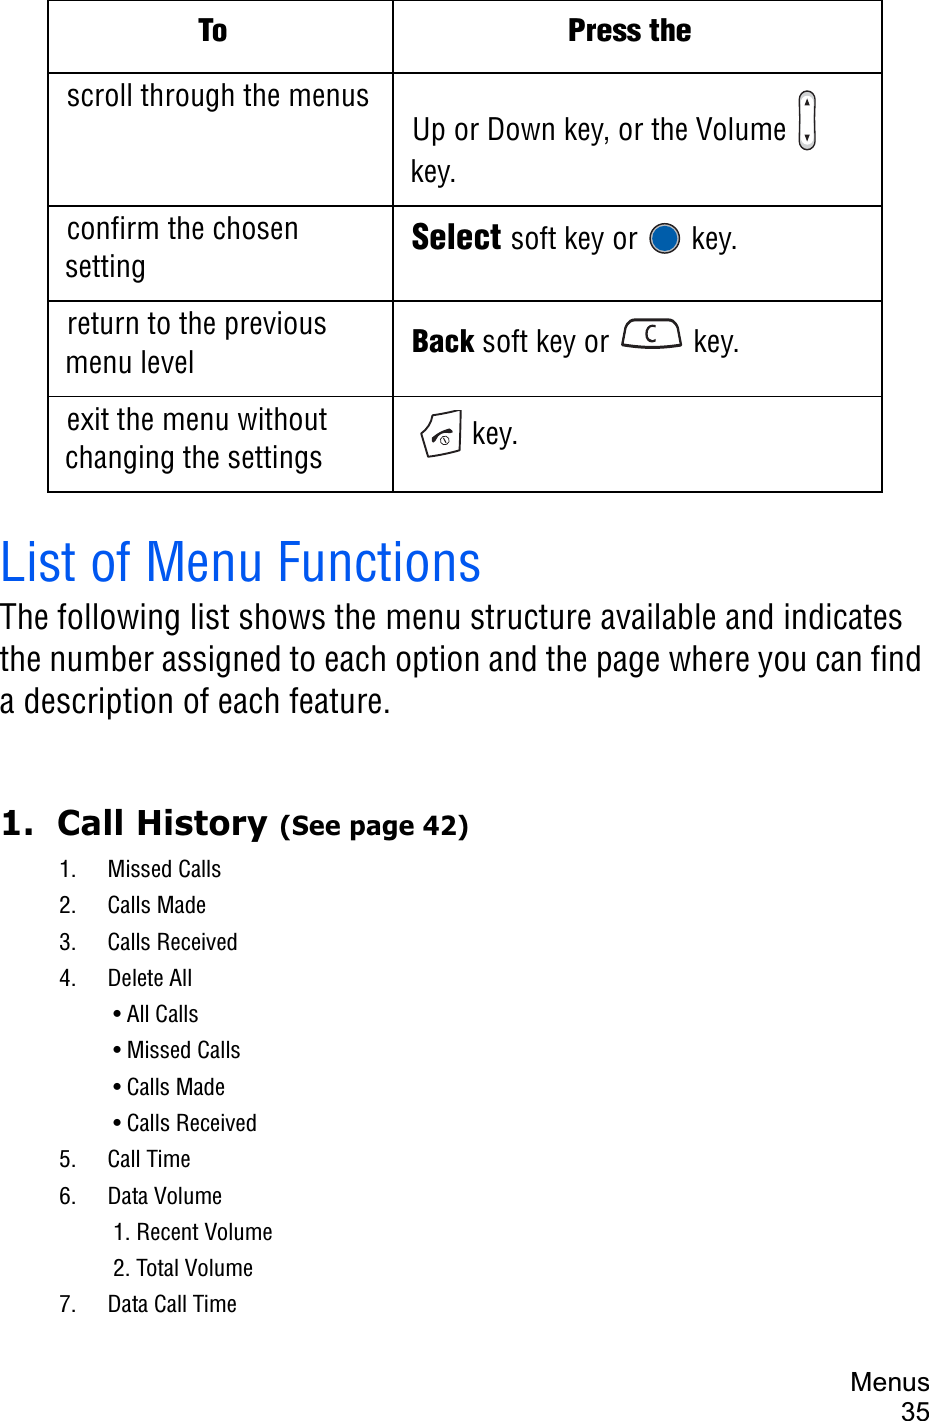 Menus35List of Menu FunctionsThe following list shows the menu structure available and indicates the number assigned to each option and the page where you can find a description of each feature.1.  Call History (See page 42) 1.  Missed Calls 2.  Calls Made 3.  Calls Received 4.  Delete All   • All Calls   • Missed Calls   • Calls Made   • Calls Received 5.  Call Time 6.  Data Volume   1. Recent Volume   2. Total Volume 7.  Data Call TimeTo Press thescroll through the menusUp or Down key, or the Volume   key.confirm the chosen setting Select soft key or   key.return to the previous menu level Back soft key or   key. exit the menu without changing the settings  key.